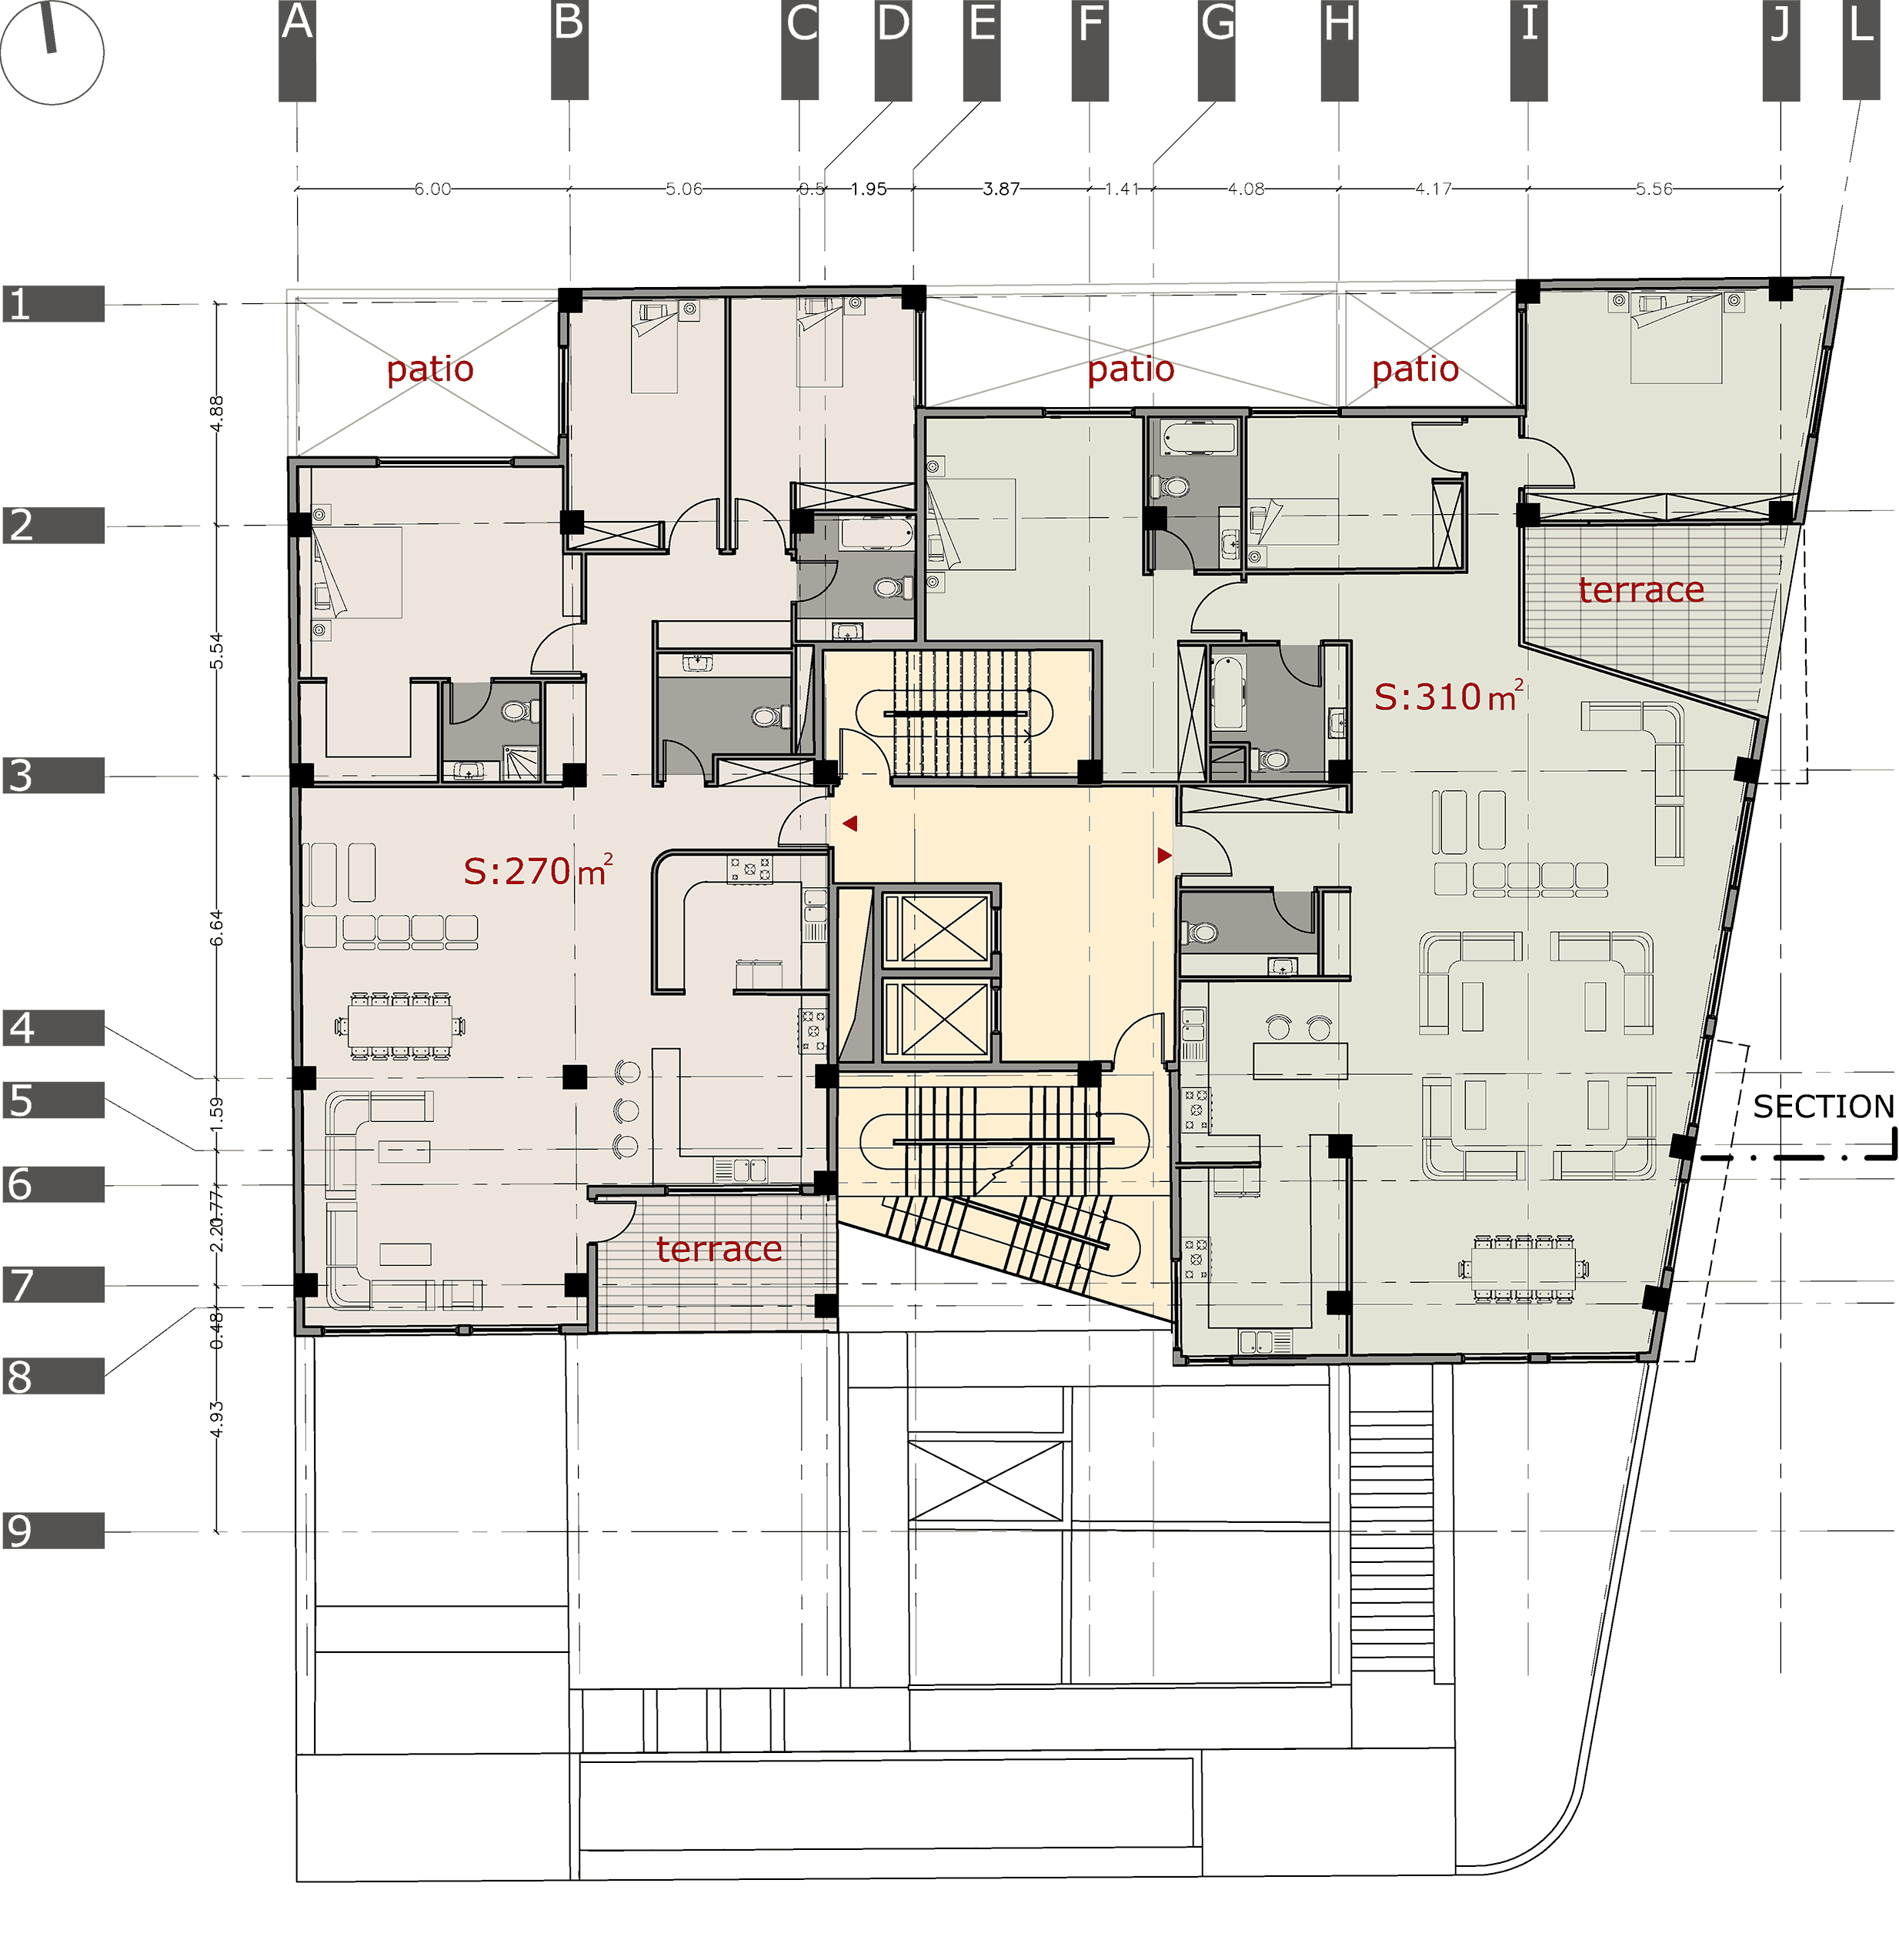 +7 and +8 floor plan